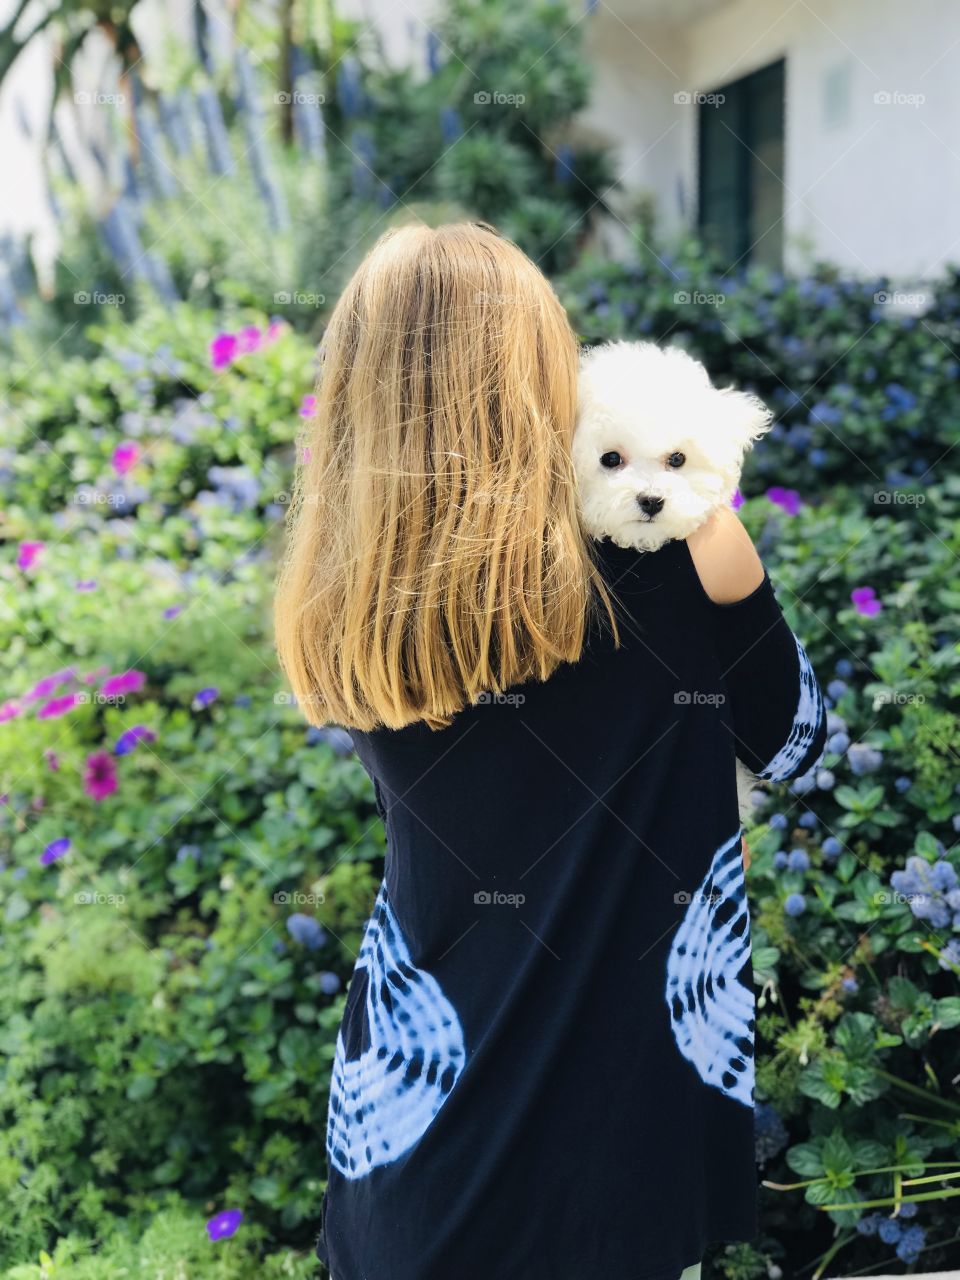 Puppy peeking over shoulder of blond girl who is holding puppy lovingly with flowers and greenery all around them. 